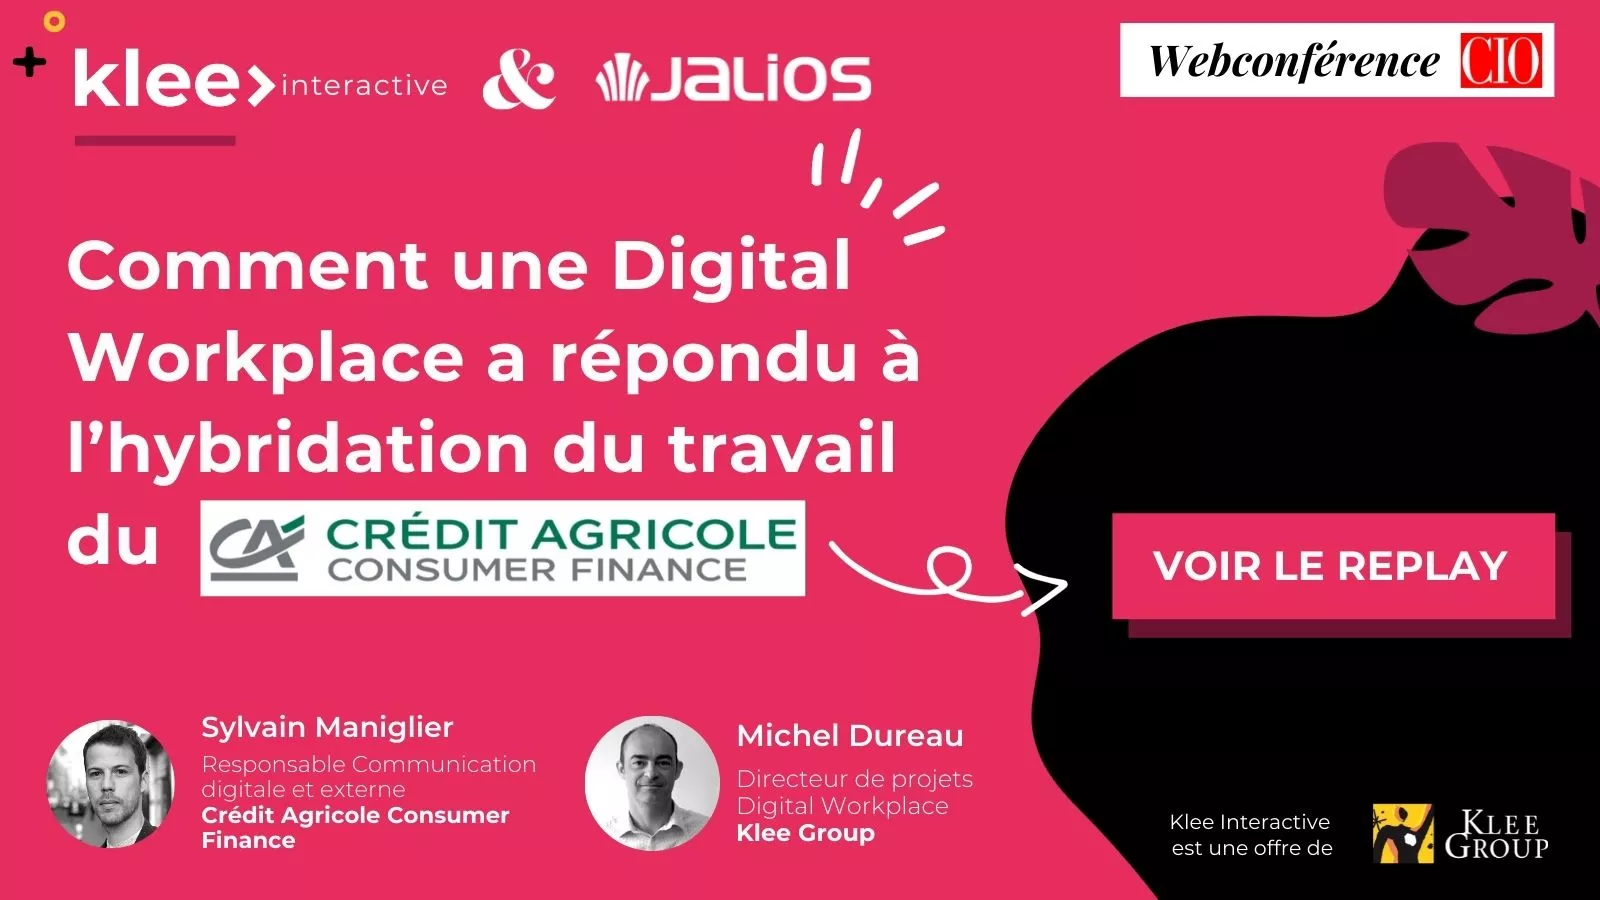 Credit Agricole Consumer Finance-Jalios-Klee-Conference-CIO-DigitalWorkplace-replay